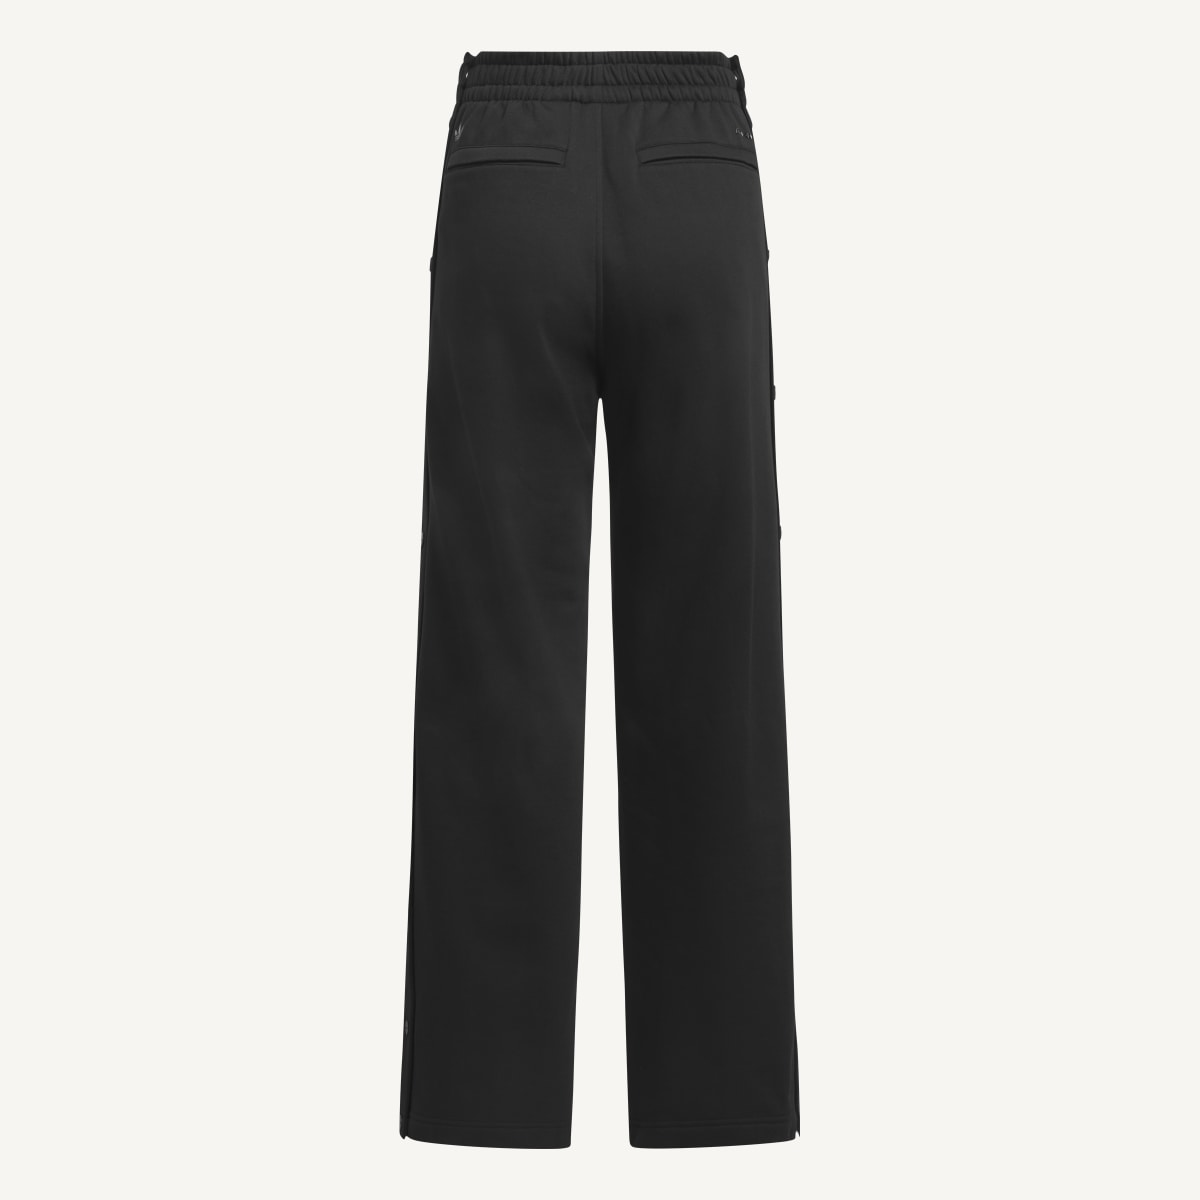 Adidas Snap Joggers (All Gender). 7